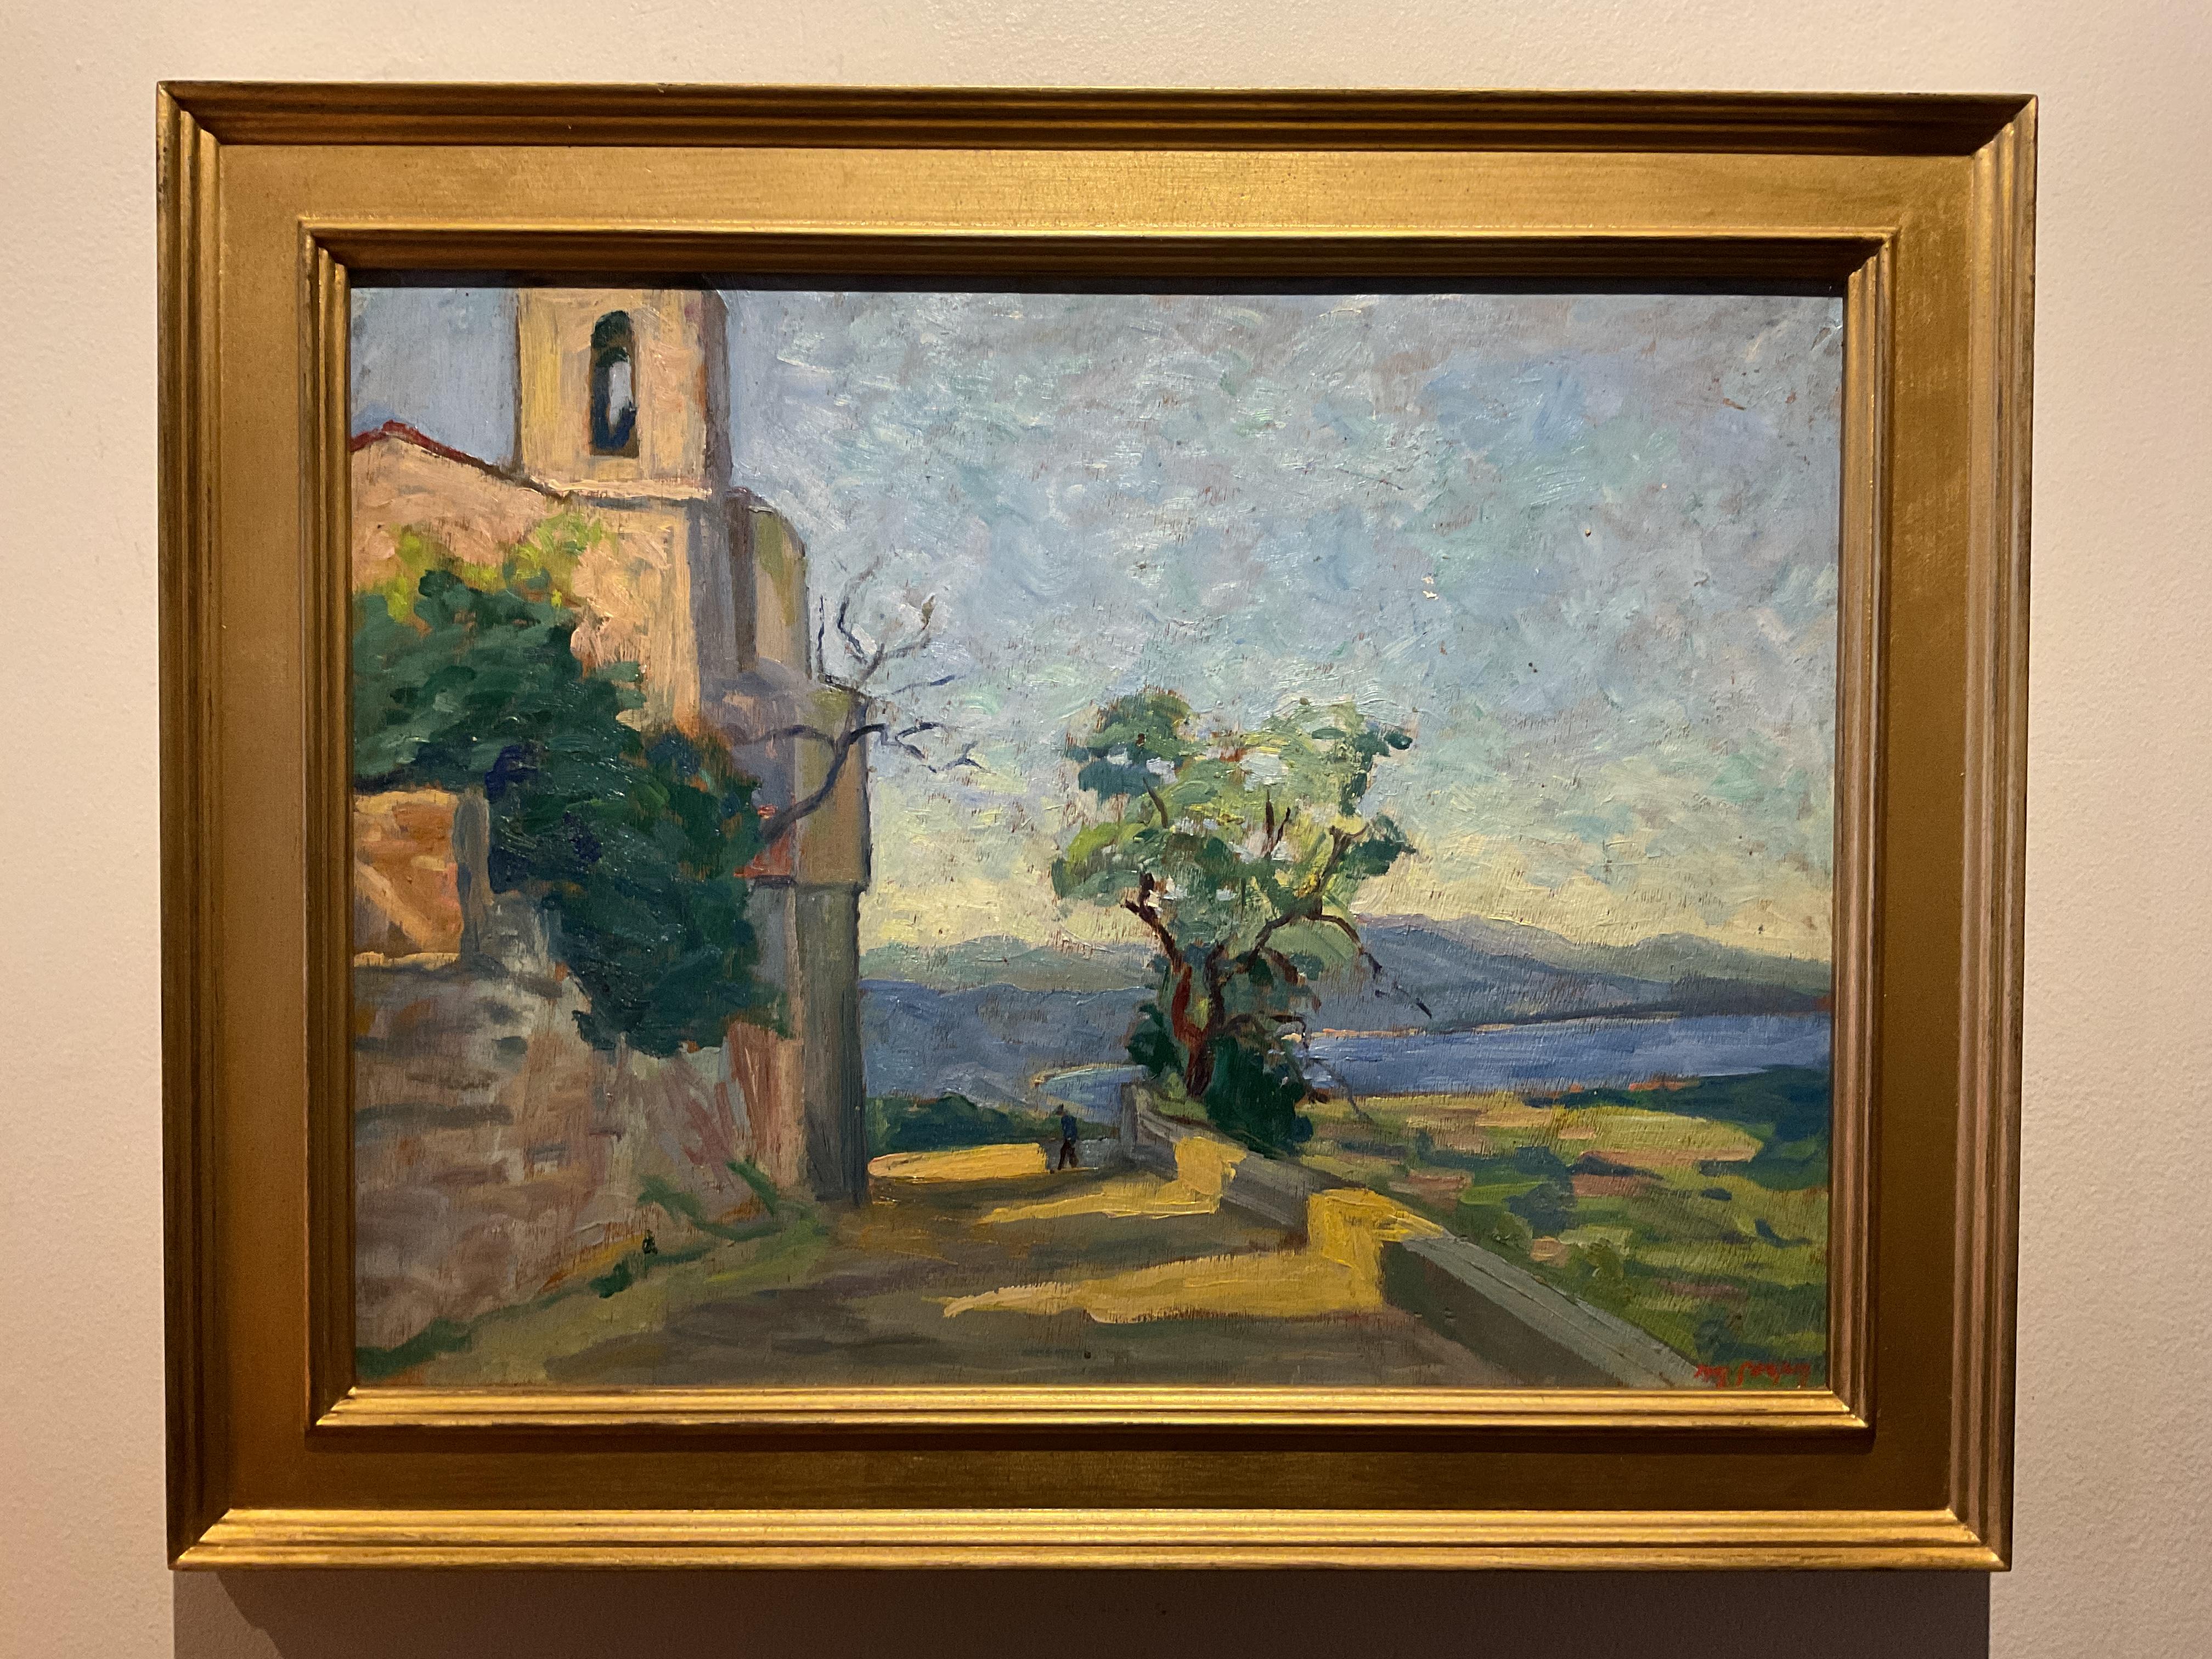 This painting by listed French artist Marcel Goupy is a colorful rendering of a location likely in Southern France, but possibly Italy or Spain.  Goupy chose a terrace overlooking a lake valley to showcase his ability to combine color, light and